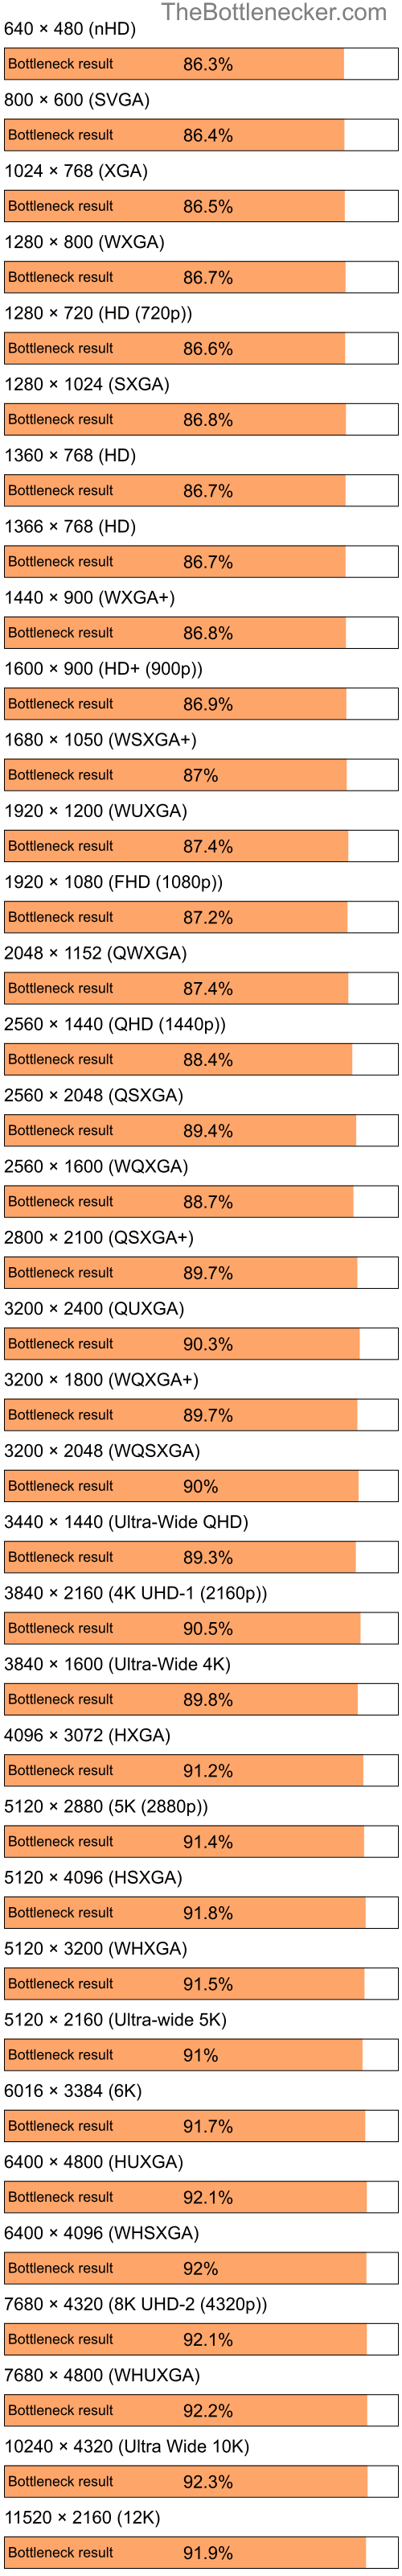 Bottleneck results by resolution for Intel Pentium 4 and NVIDIA GeForce FX 5600 in Graphic Card Intense Tasks